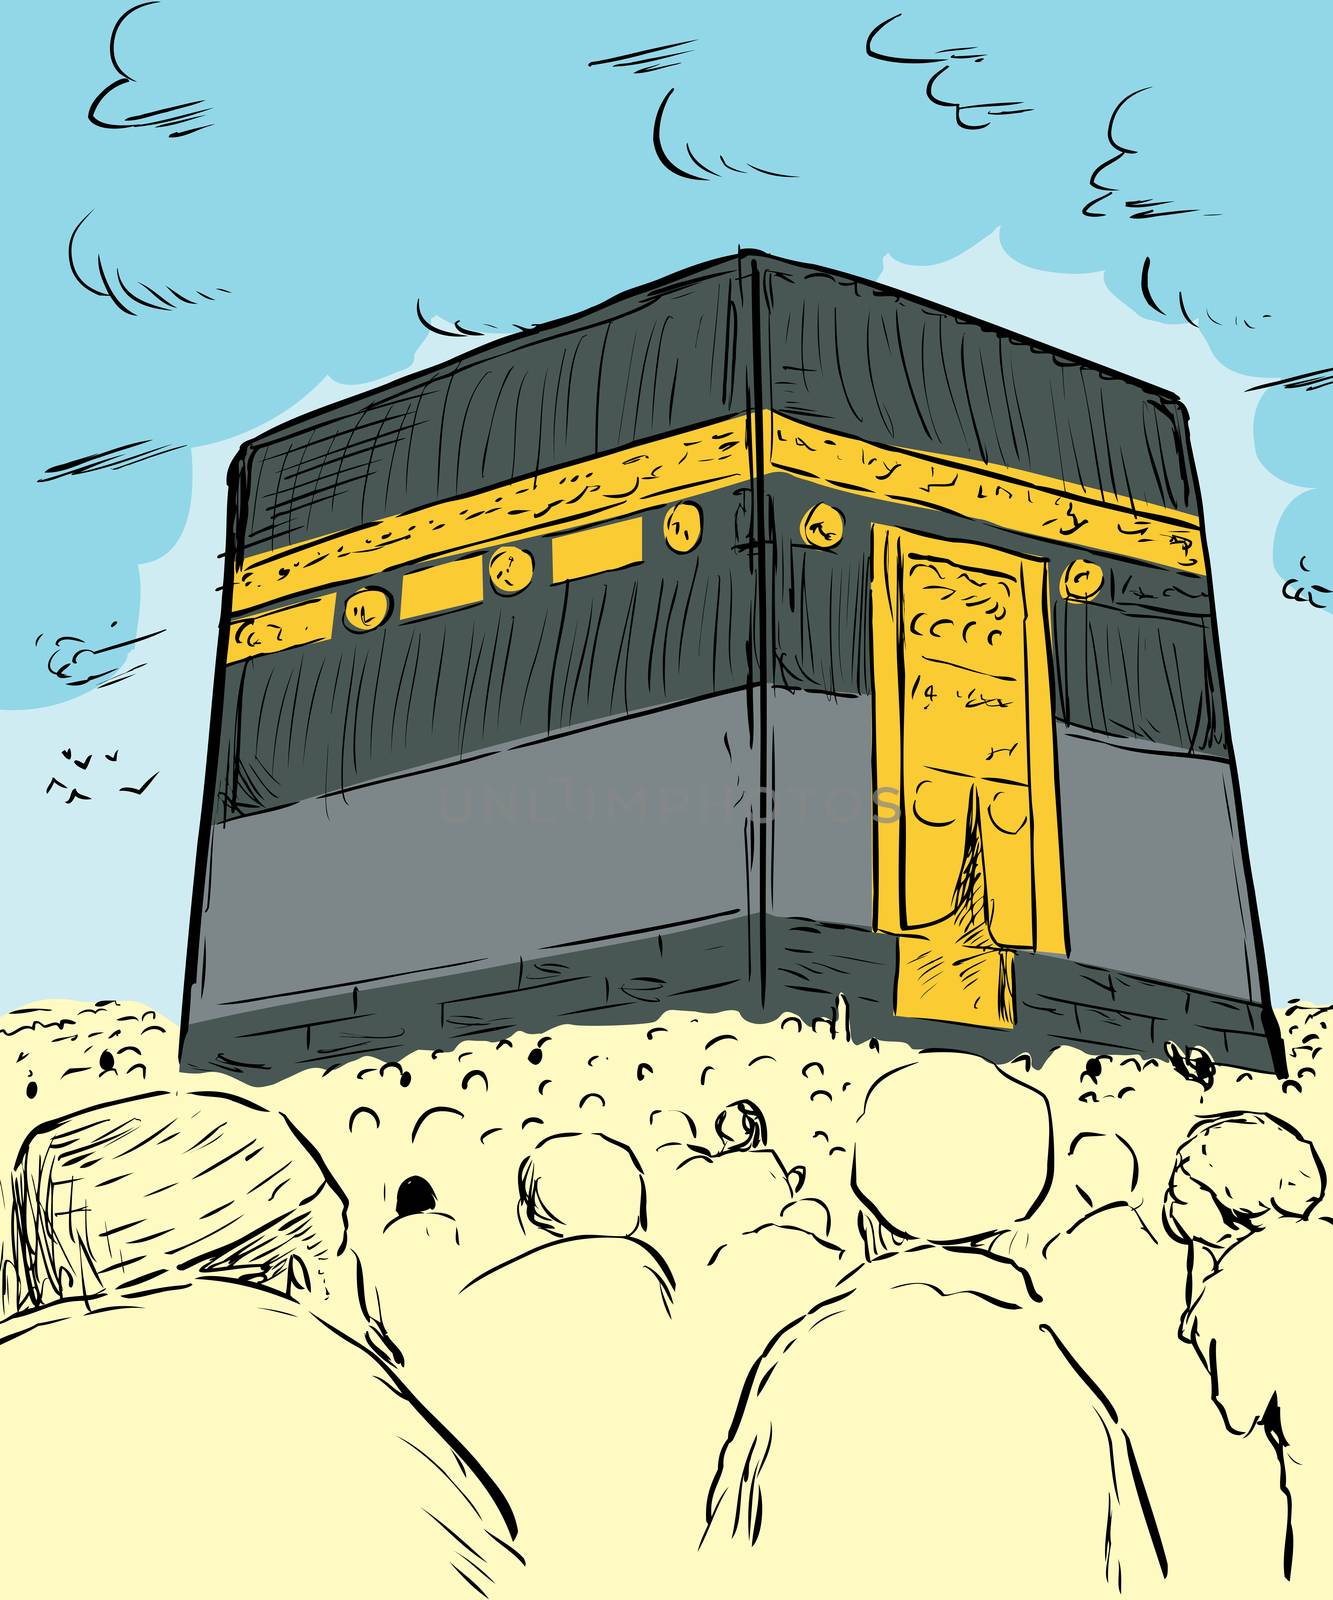 Illustration of devout Muslim pilgrims assembled around the Kaaba in Mecca, Arabia